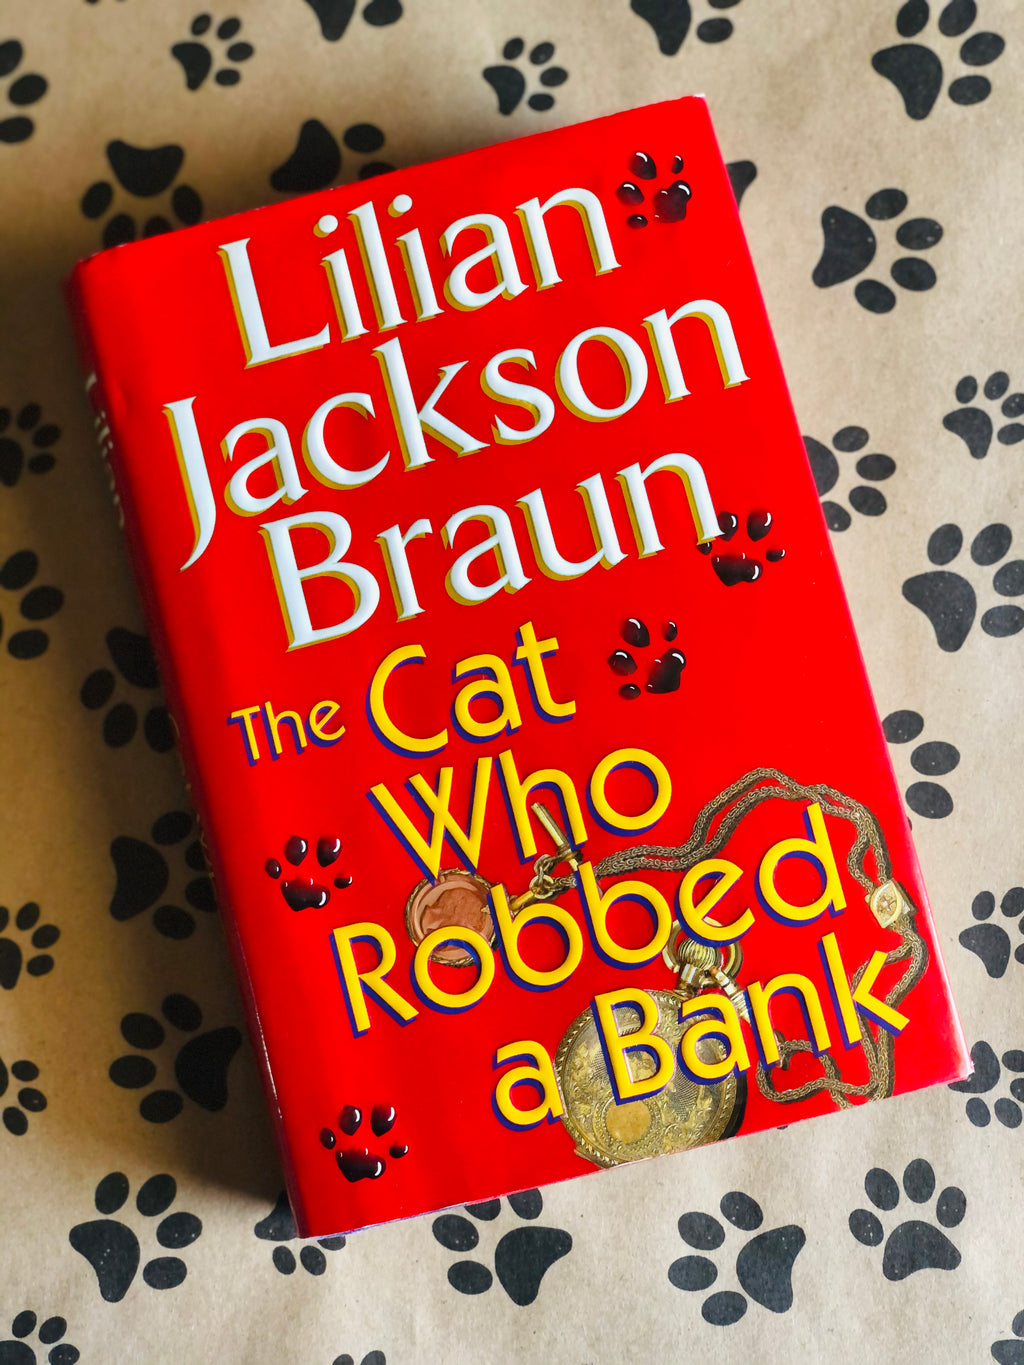 The Cat Who Robbed a Bank- By Lilian Jackson Braun